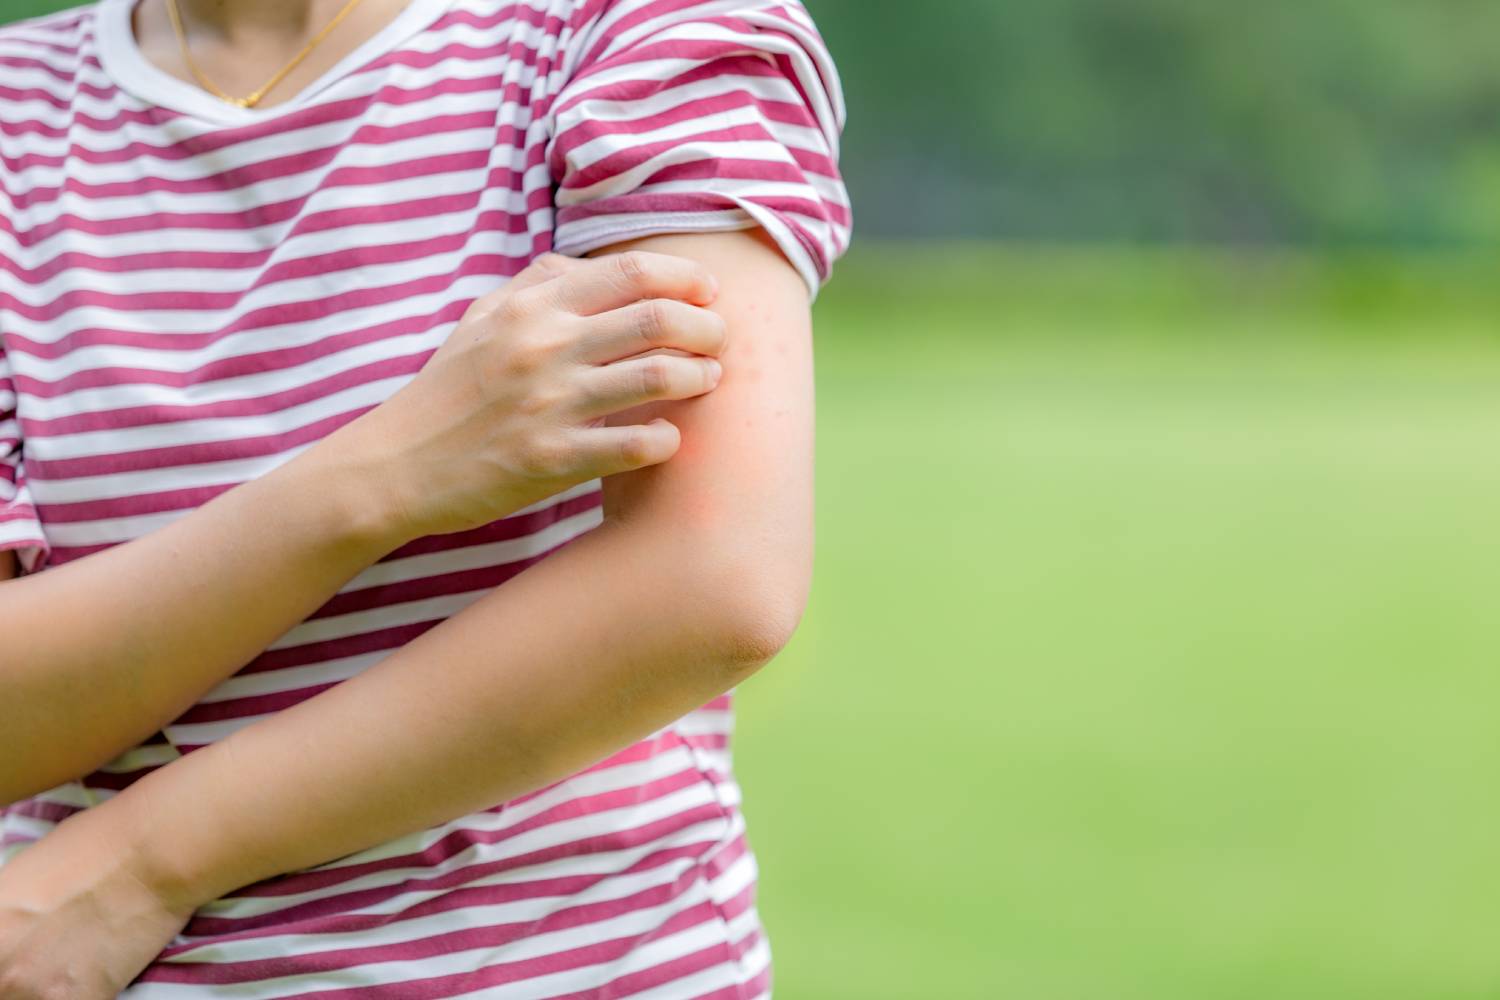 Women who are itching from insect bites in the grass. / Health care and medicine.